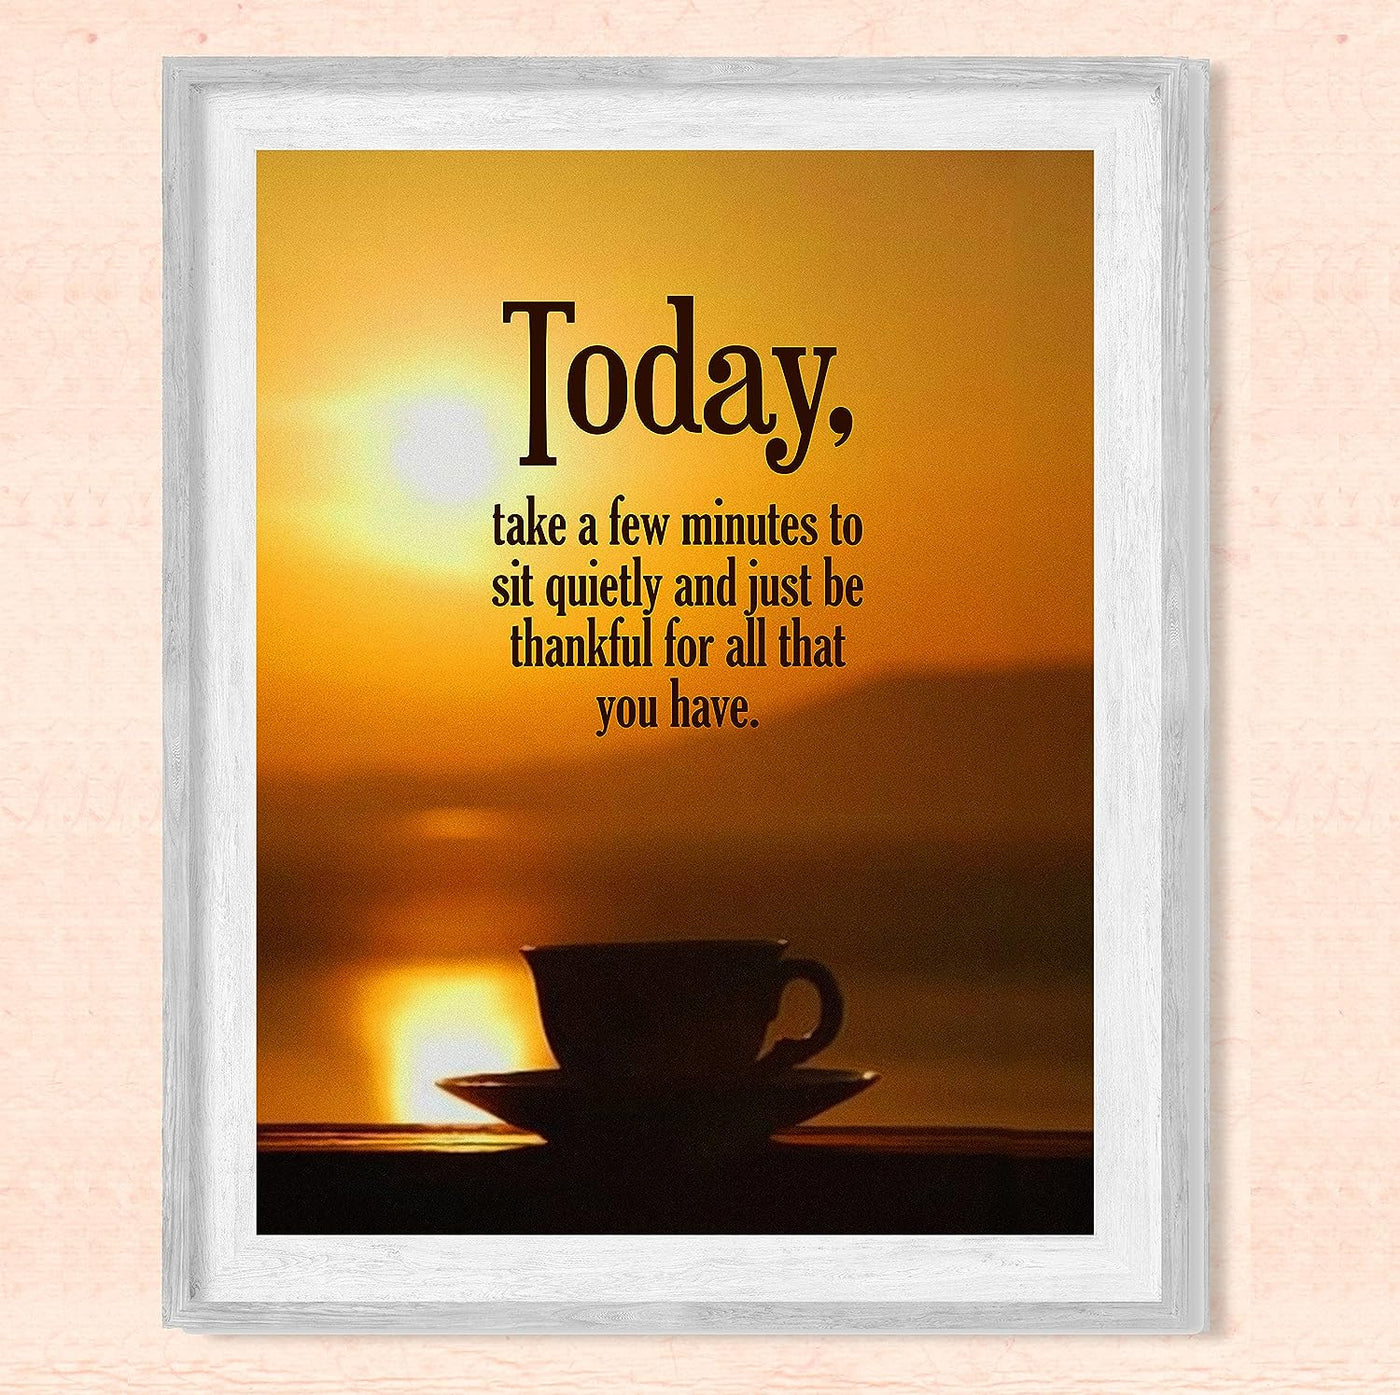 Today-Take a Few Minutes to Be Thankful Inspirational Christian Wall Sign -8 x 10" Sunset Print w/Coffee Mug Image- Ready to Frame. Motivational Decor for Home-Office-School-Work. Great Advice!